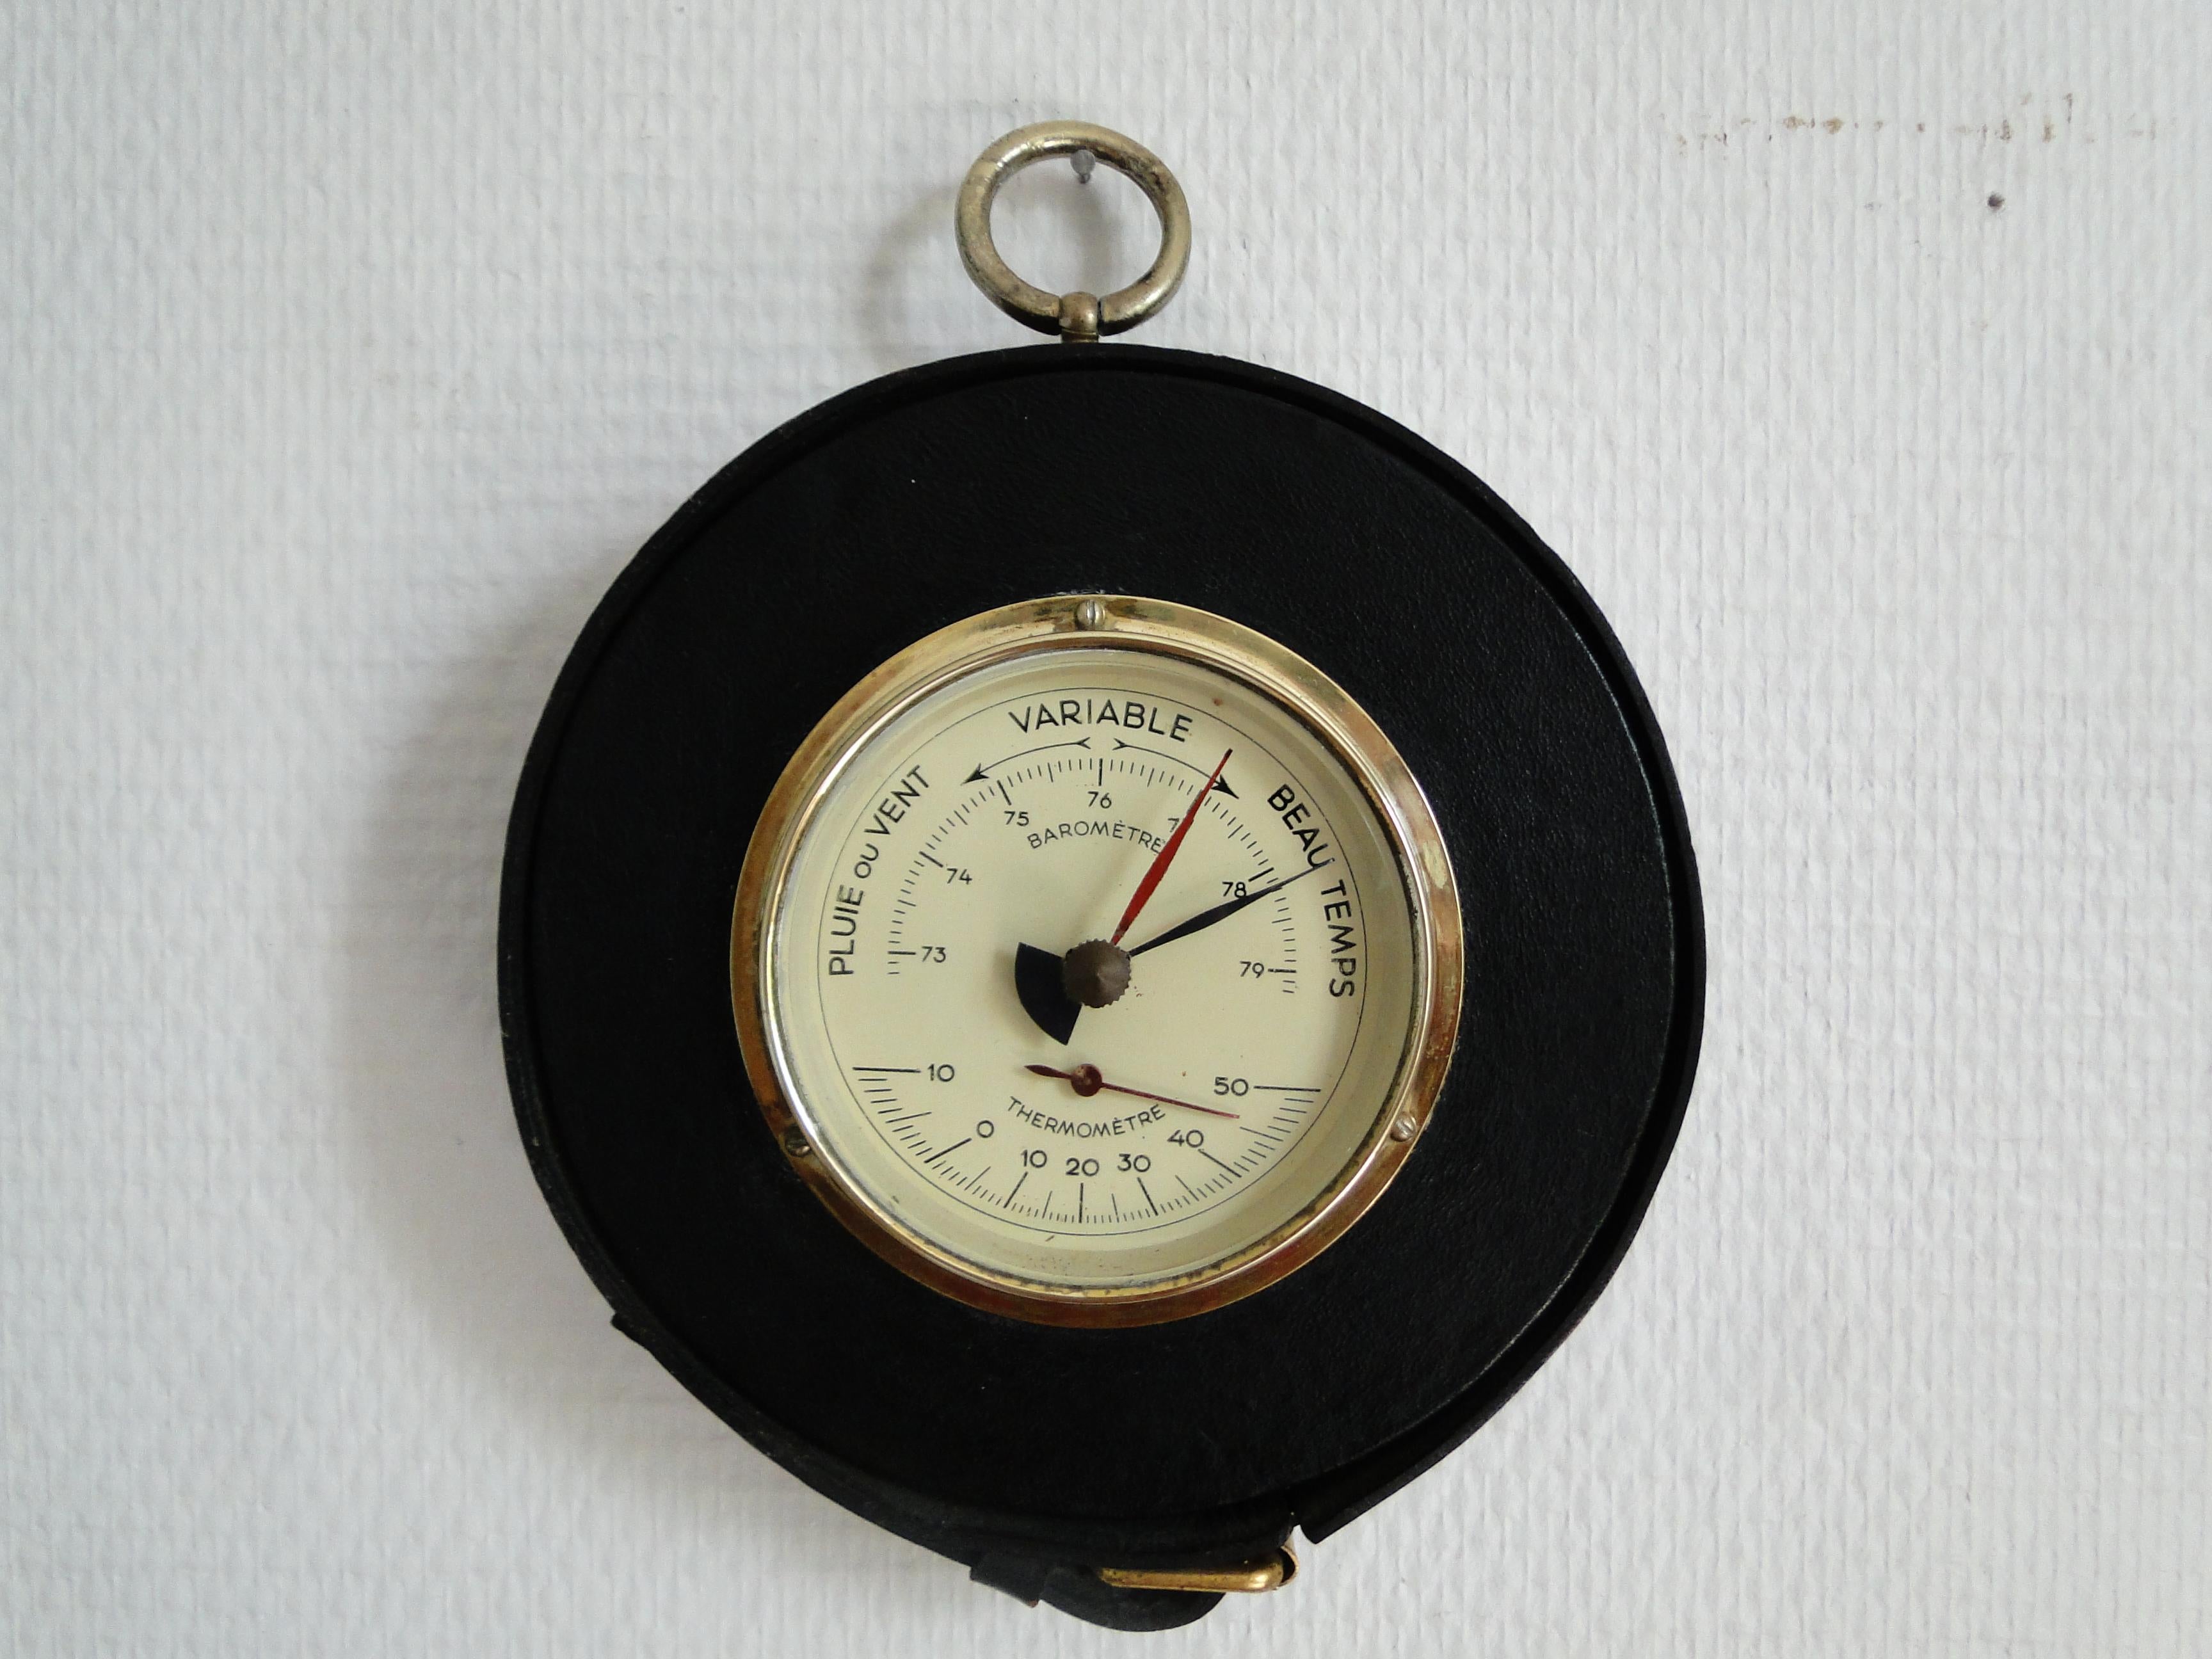 Barometer and thermometer by Jacques Adnet, around 1950 Barometer in brass, glass and saddle stitched black leather. Everything is in very good condition, only the barometer works.